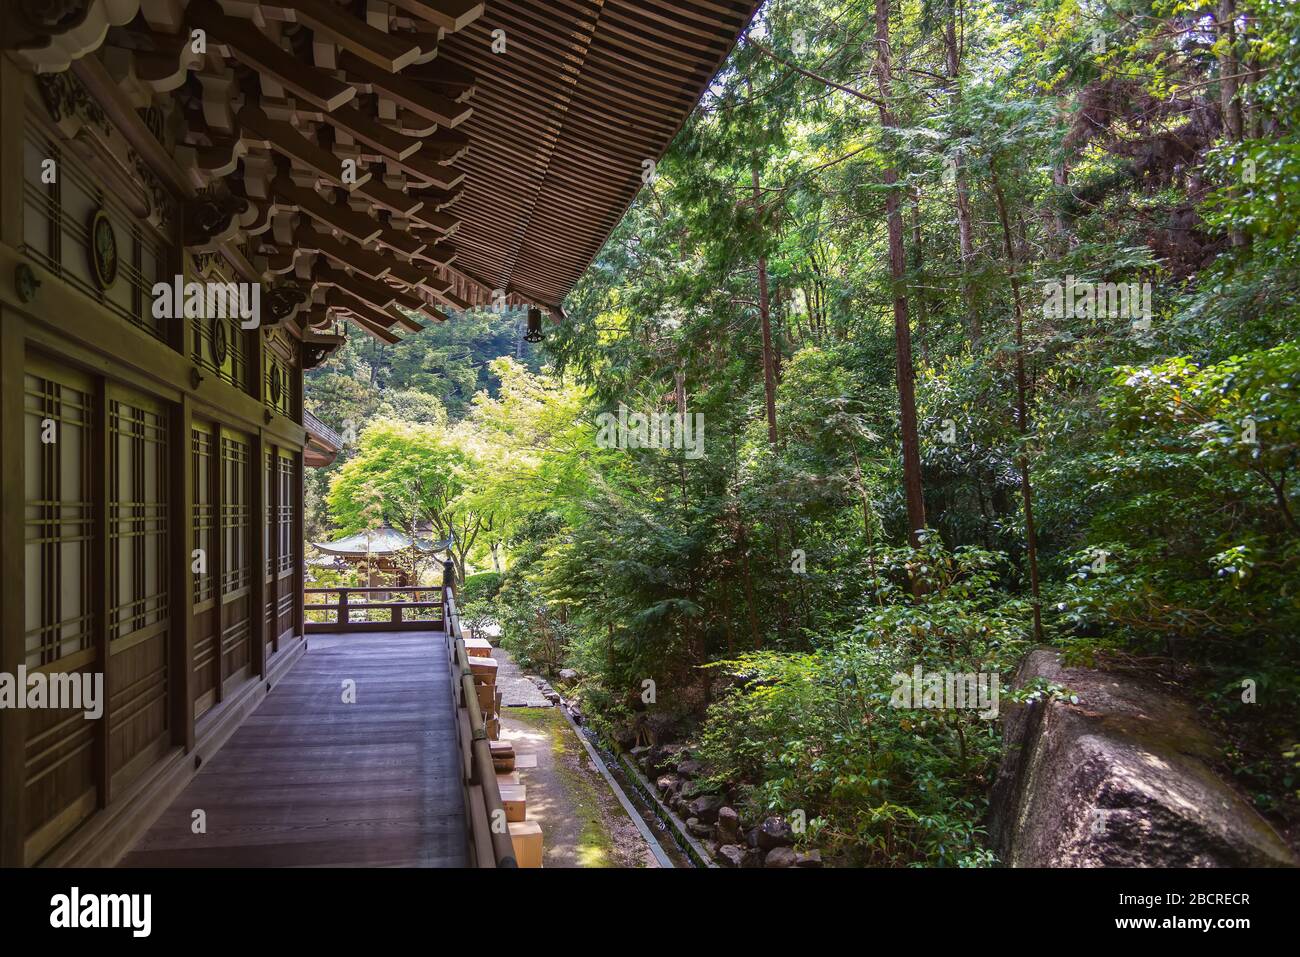 Itsukushima, Japan - April 27, 2014: The Maniden Hall and the forest in Daisho-in temple complex. This is the main prayer hall of the complex Stock Photo